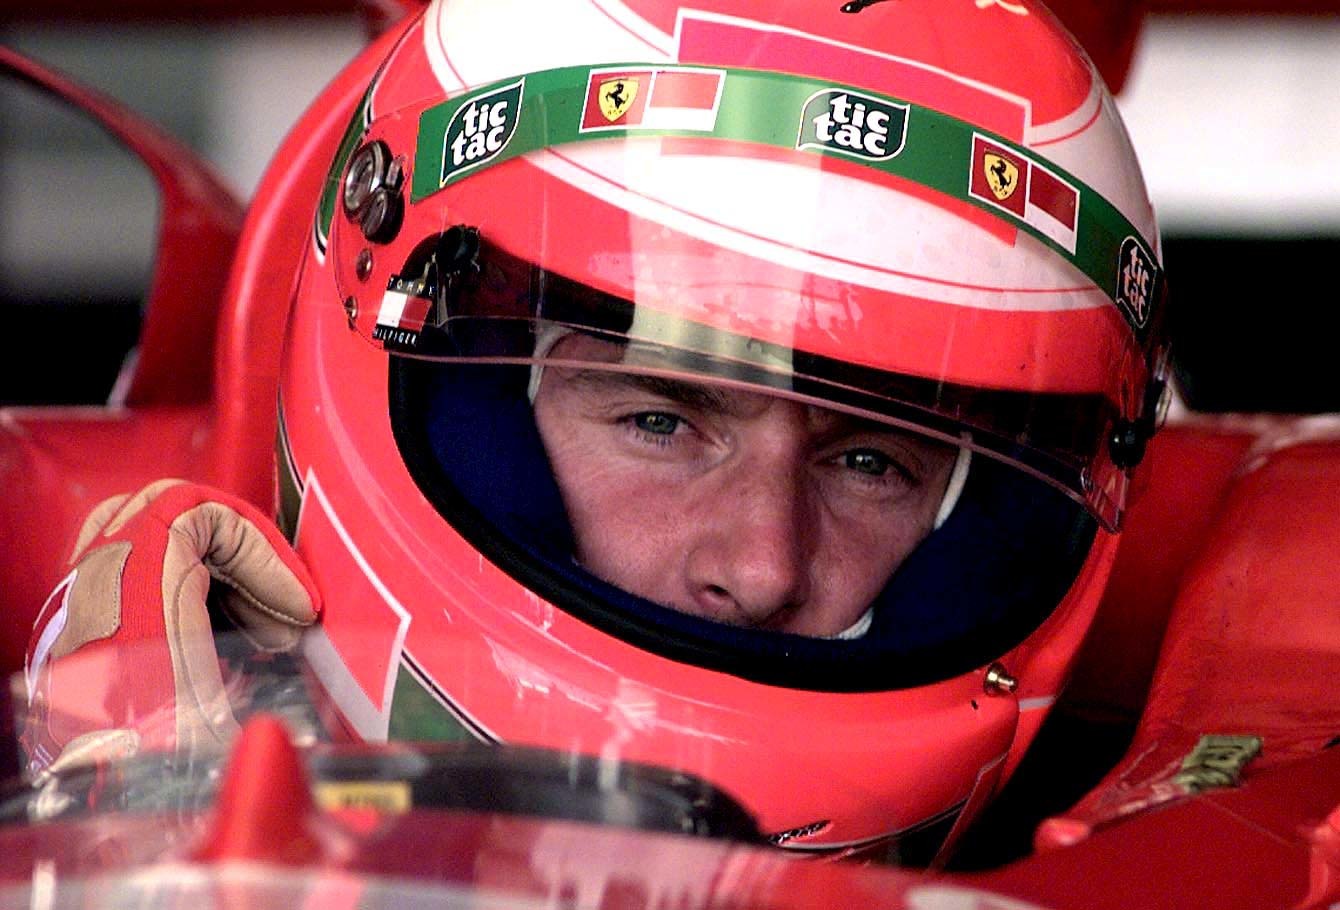 Eddie Irvine came within two points of winning the 1999 F1 drivers championship with Ferrarii